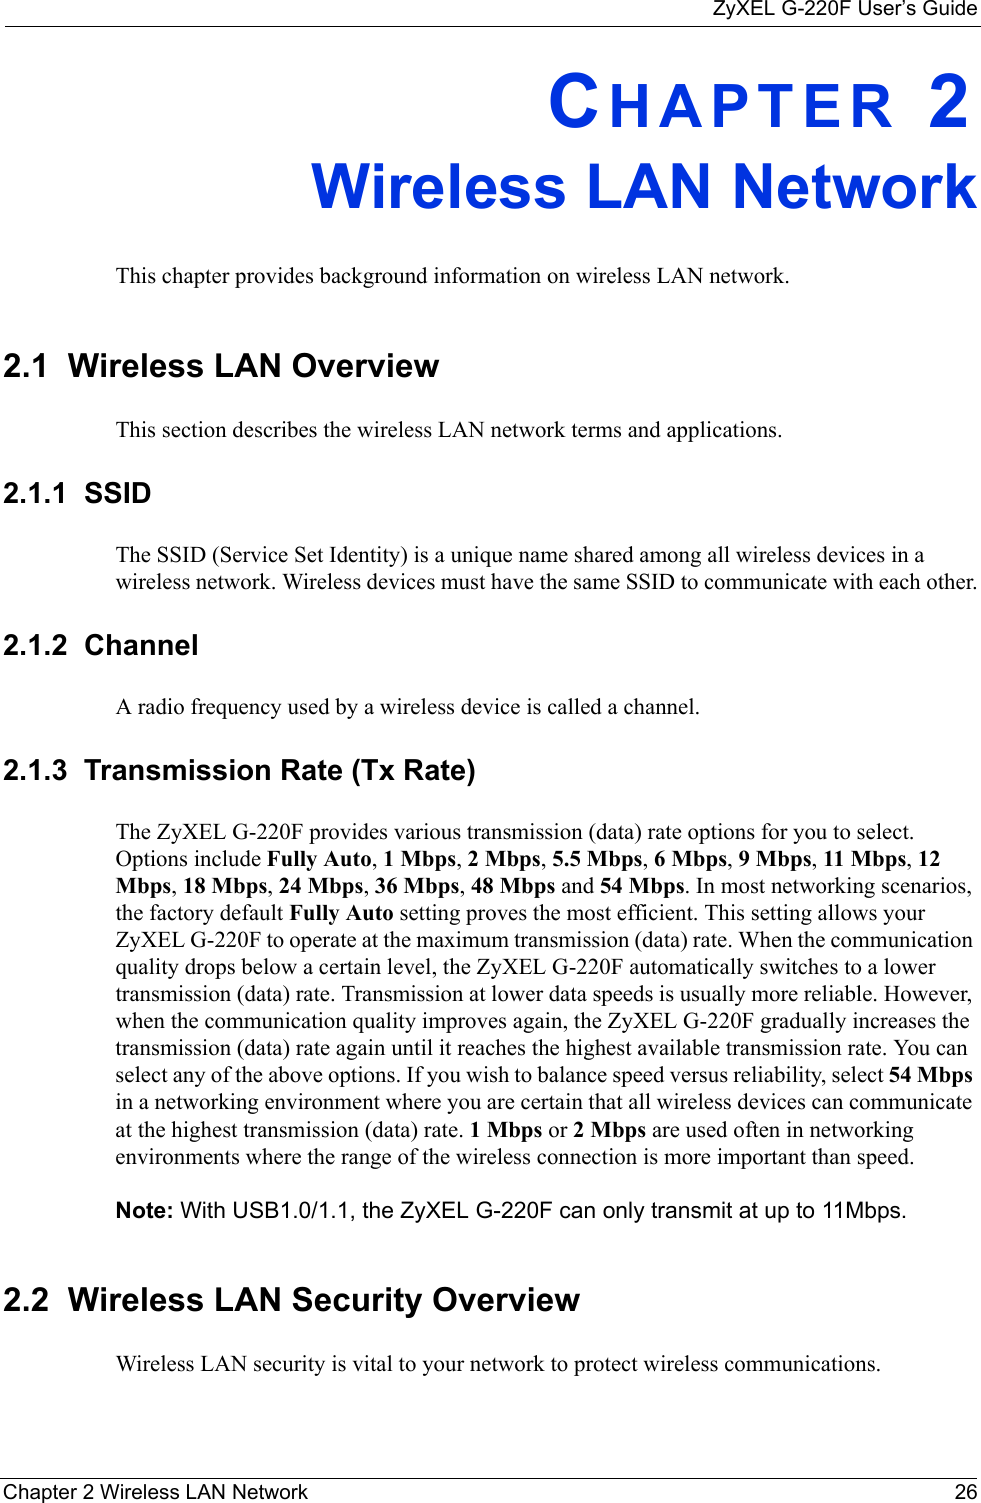 ZyXEL G-220F User’s GuideChapter 2 Wireless LAN Network 26CHAPTER 2Wireless LAN NetworkThis chapter provides background information on wireless LAN network.2.1  Wireless LAN Overview This section describes the wireless LAN network terms and applications.2.1.1  SSIDThe SSID (Service Set Identity) is a unique name shared among all wireless devices in a wireless network. Wireless devices must have the same SSID to communicate with each other.2.1.2  ChannelA radio frequency used by a wireless device is called a channel.2.1.3  Transmission Rate (Tx Rate)The ZyXEL G-220F provides various transmission (data) rate options for you to select. Options include Fully Auto, 1 Mbps, 2 Mbps, 5.5 Mbps, 6 Mbps, 9 Mbps, 11 Mbps, 12 Mbps, 18 Mbps, 24 Mbps, 36 Mbps, 48 Mbps and 54 Mbps. In most networking scenarios, the factory default Fully Auto setting proves the most efficient. This setting allows your ZyXEL G-220F to operate at the maximum transmission (data) rate. When the communication quality drops below a certain level, the ZyXEL G-220F automatically switches to a lower transmission (data) rate. Transmission at lower data speeds is usually more reliable. However, when the communication quality improves again, the ZyXEL G-220F gradually increases the transmission (data) rate again until it reaches the highest available transmission rate. You can select any of the above options. If you wish to balance speed versus reliability, select 54 Mbps in a networking environment where you are certain that all wireless devices can communicate at the highest transmission (data) rate. 1 Mbps or 2 Mbps are used often in networking environments where the range of the wireless connection is more important than speed. Note: With USB1.0/1.1, the ZyXEL G-220F can only transmit at up to 11Mbps.2.2  Wireless LAN Security Overview Wireless LAN security is vital to your network to protect wireless communications.